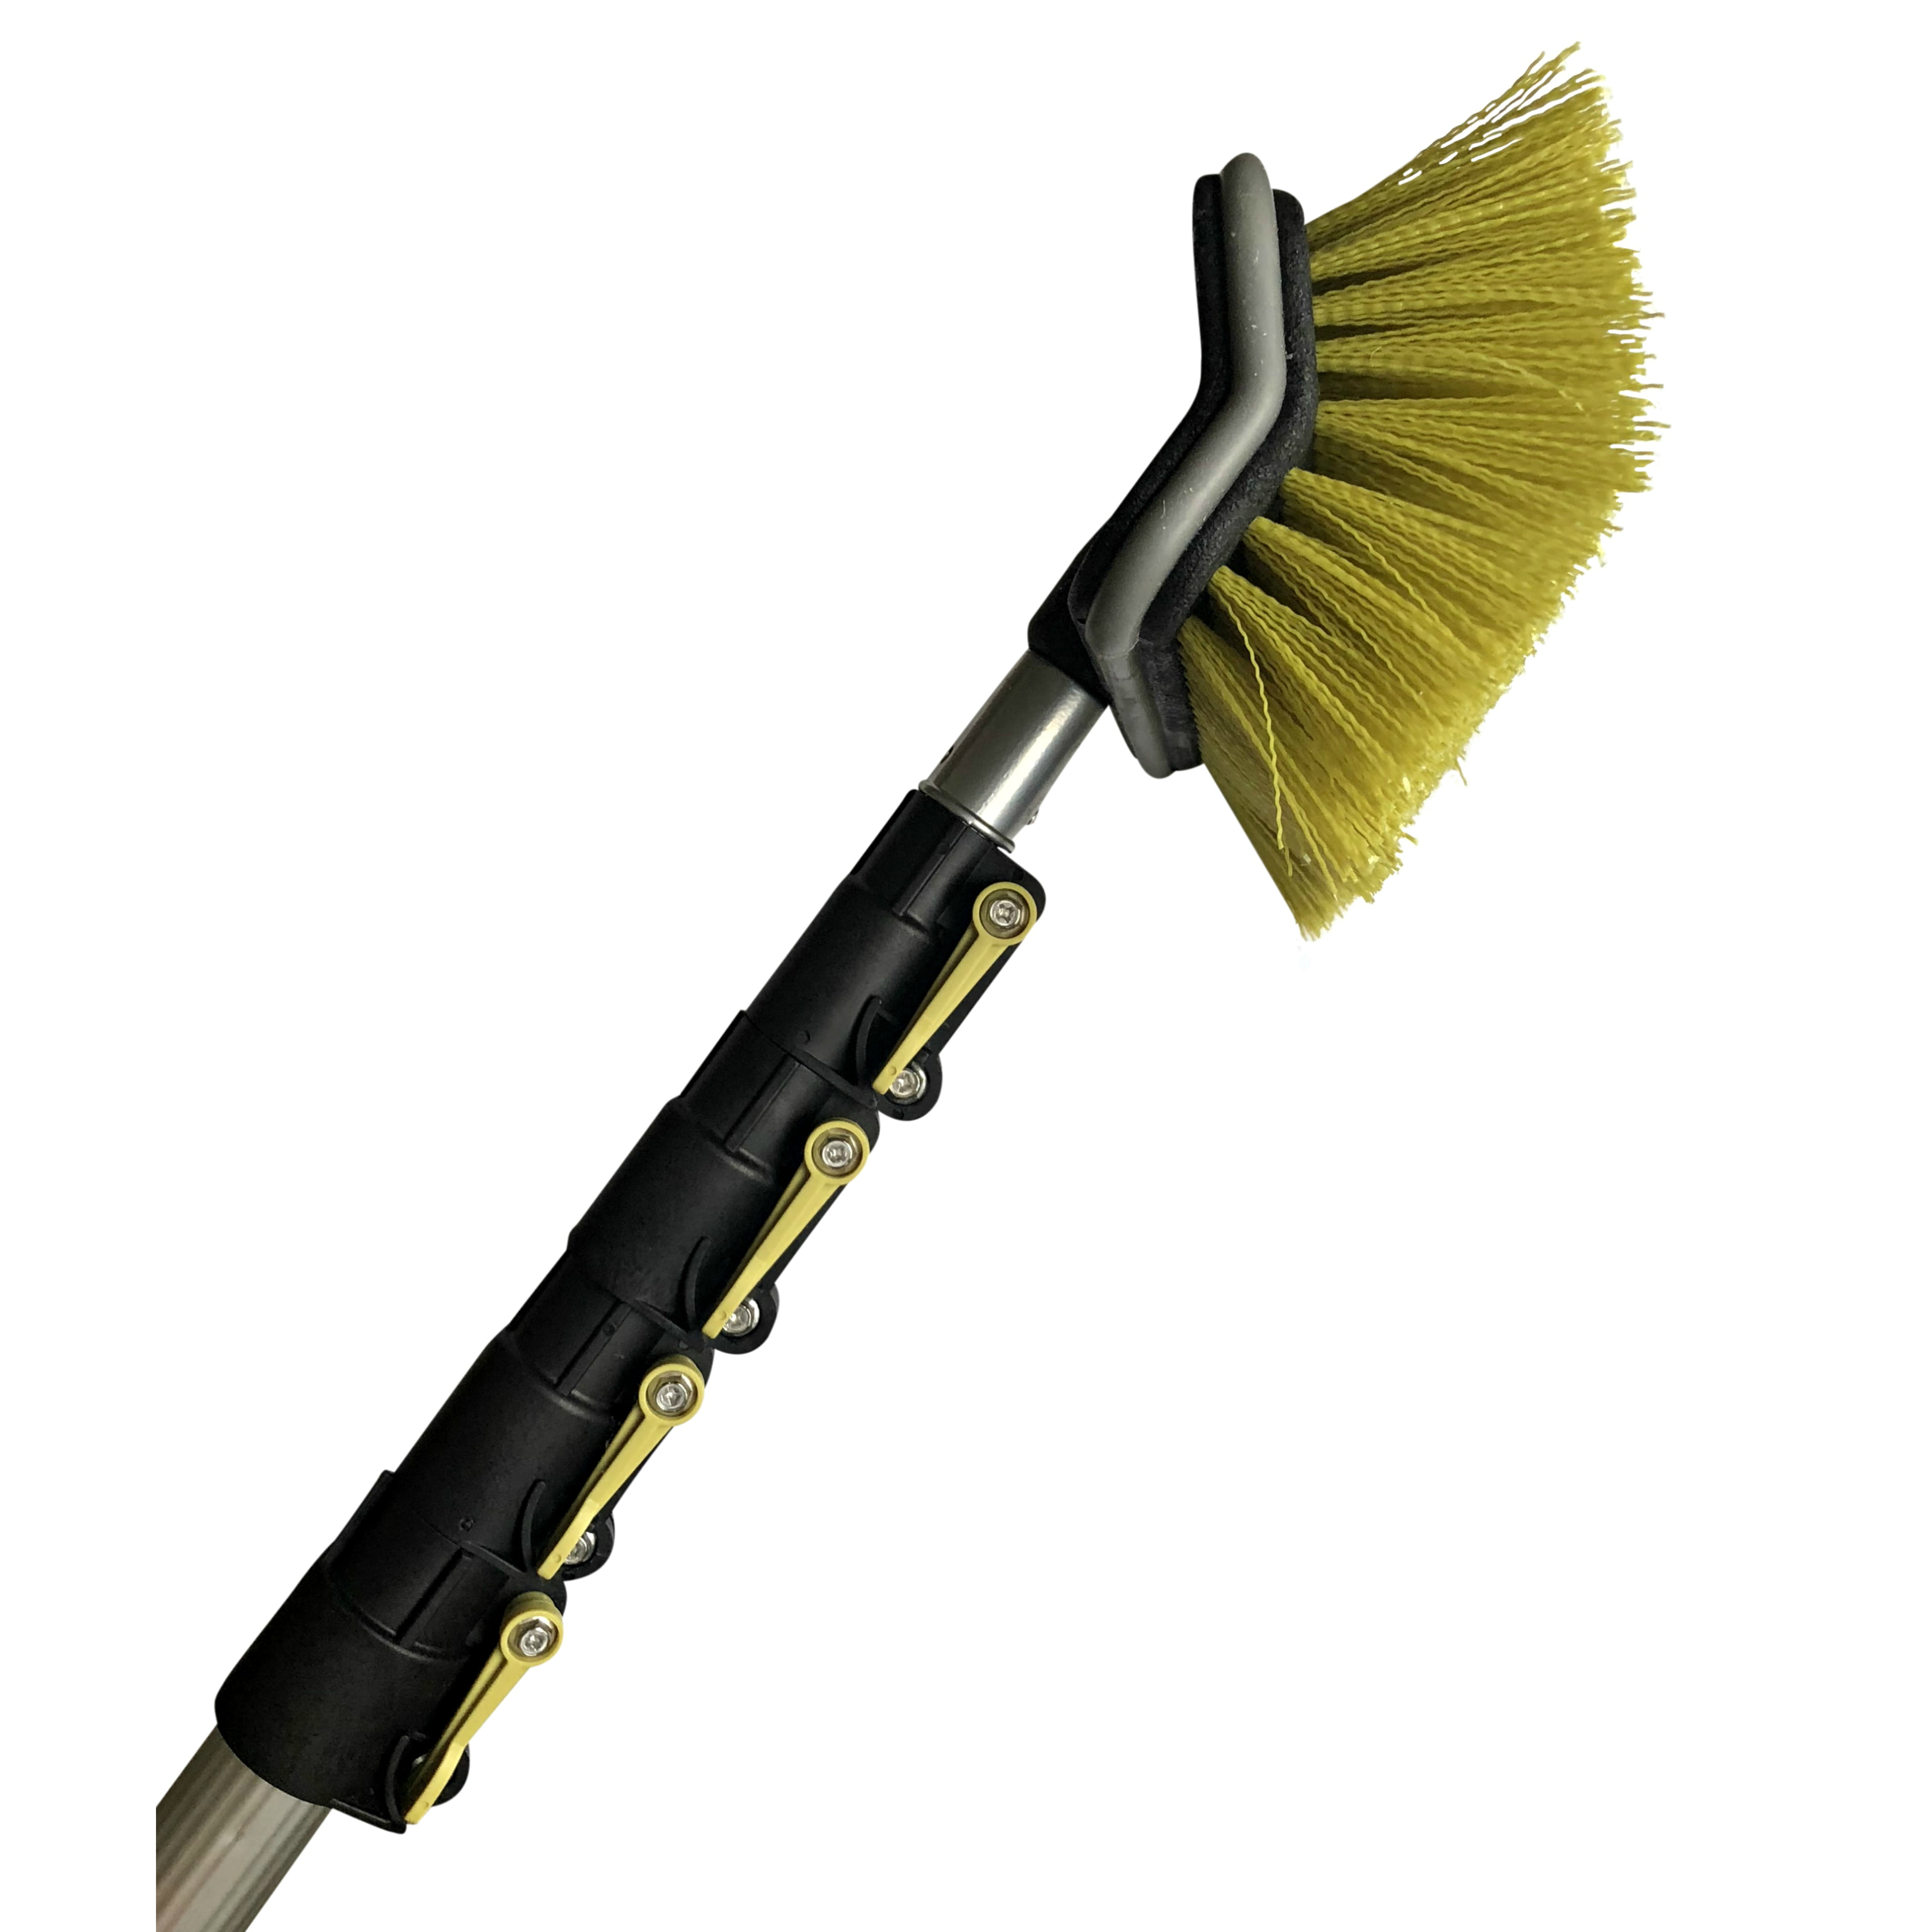 Telescopic Brush For Cleaning Siding